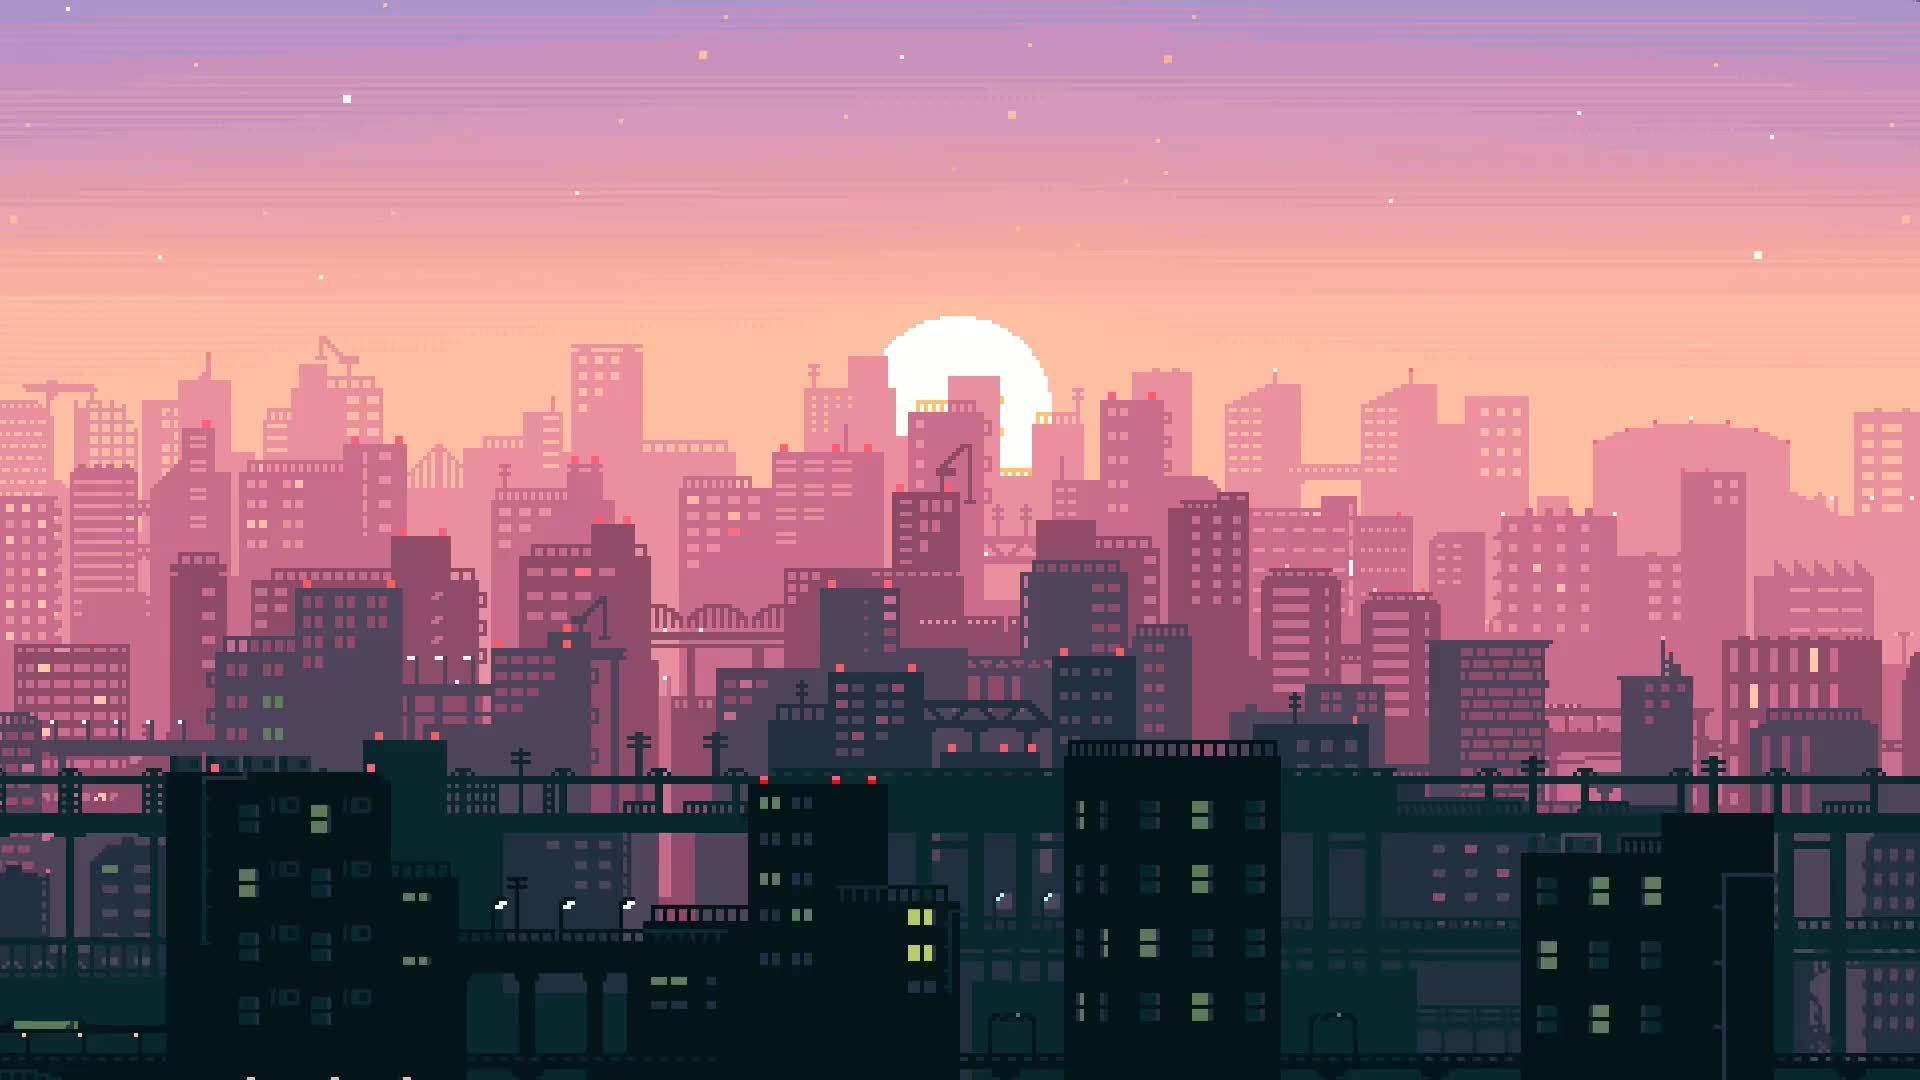 100+] Aesthetic Anime City Wallpapers | Wallpapers.com